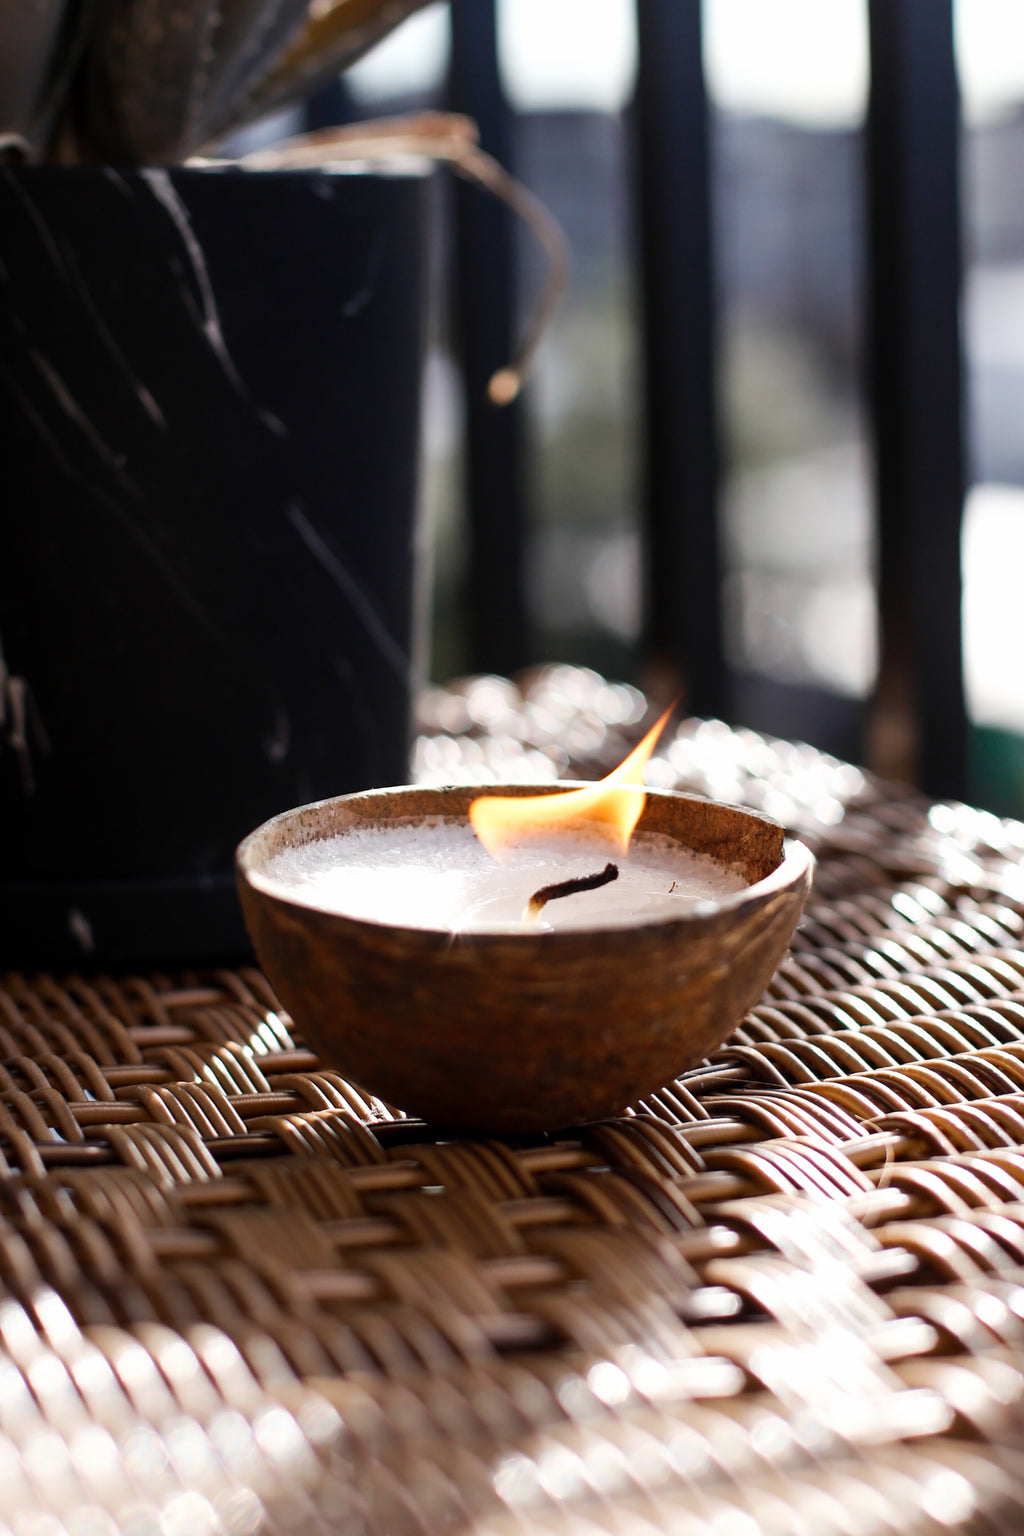 Candle in wooden Bowl